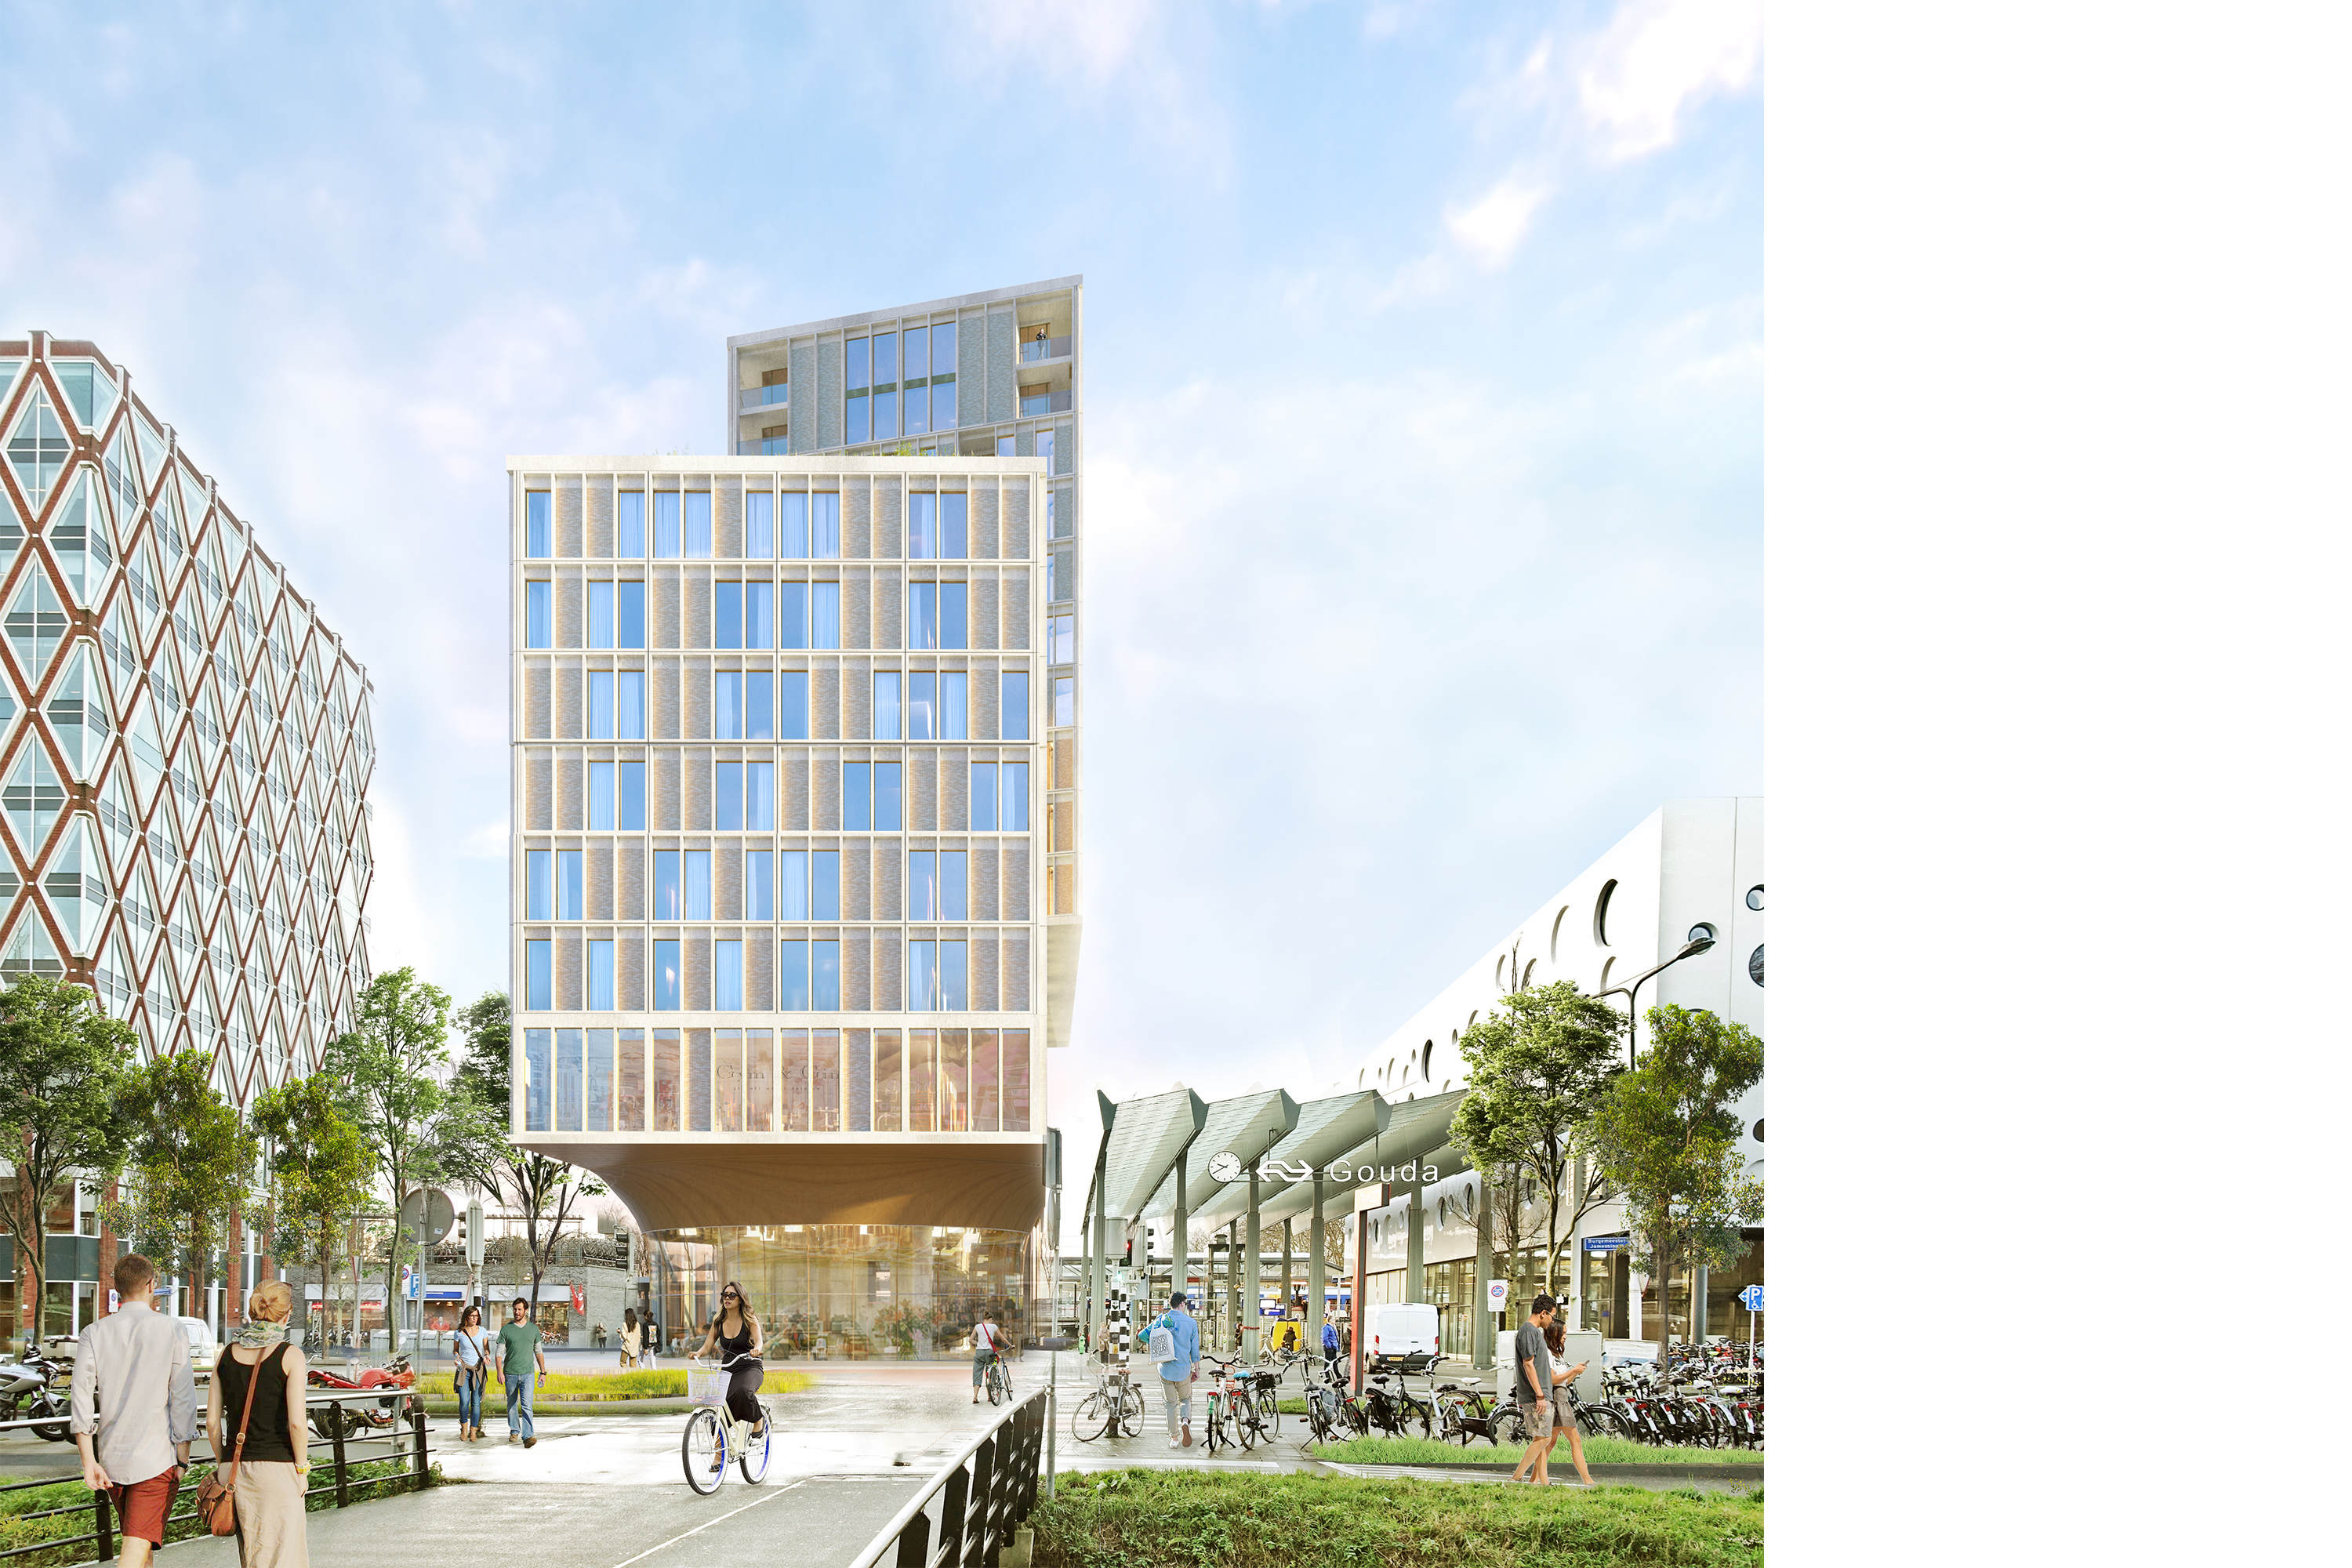 KCAP designs Kavel 5 in Gouda's station area for ABC Vastgoed